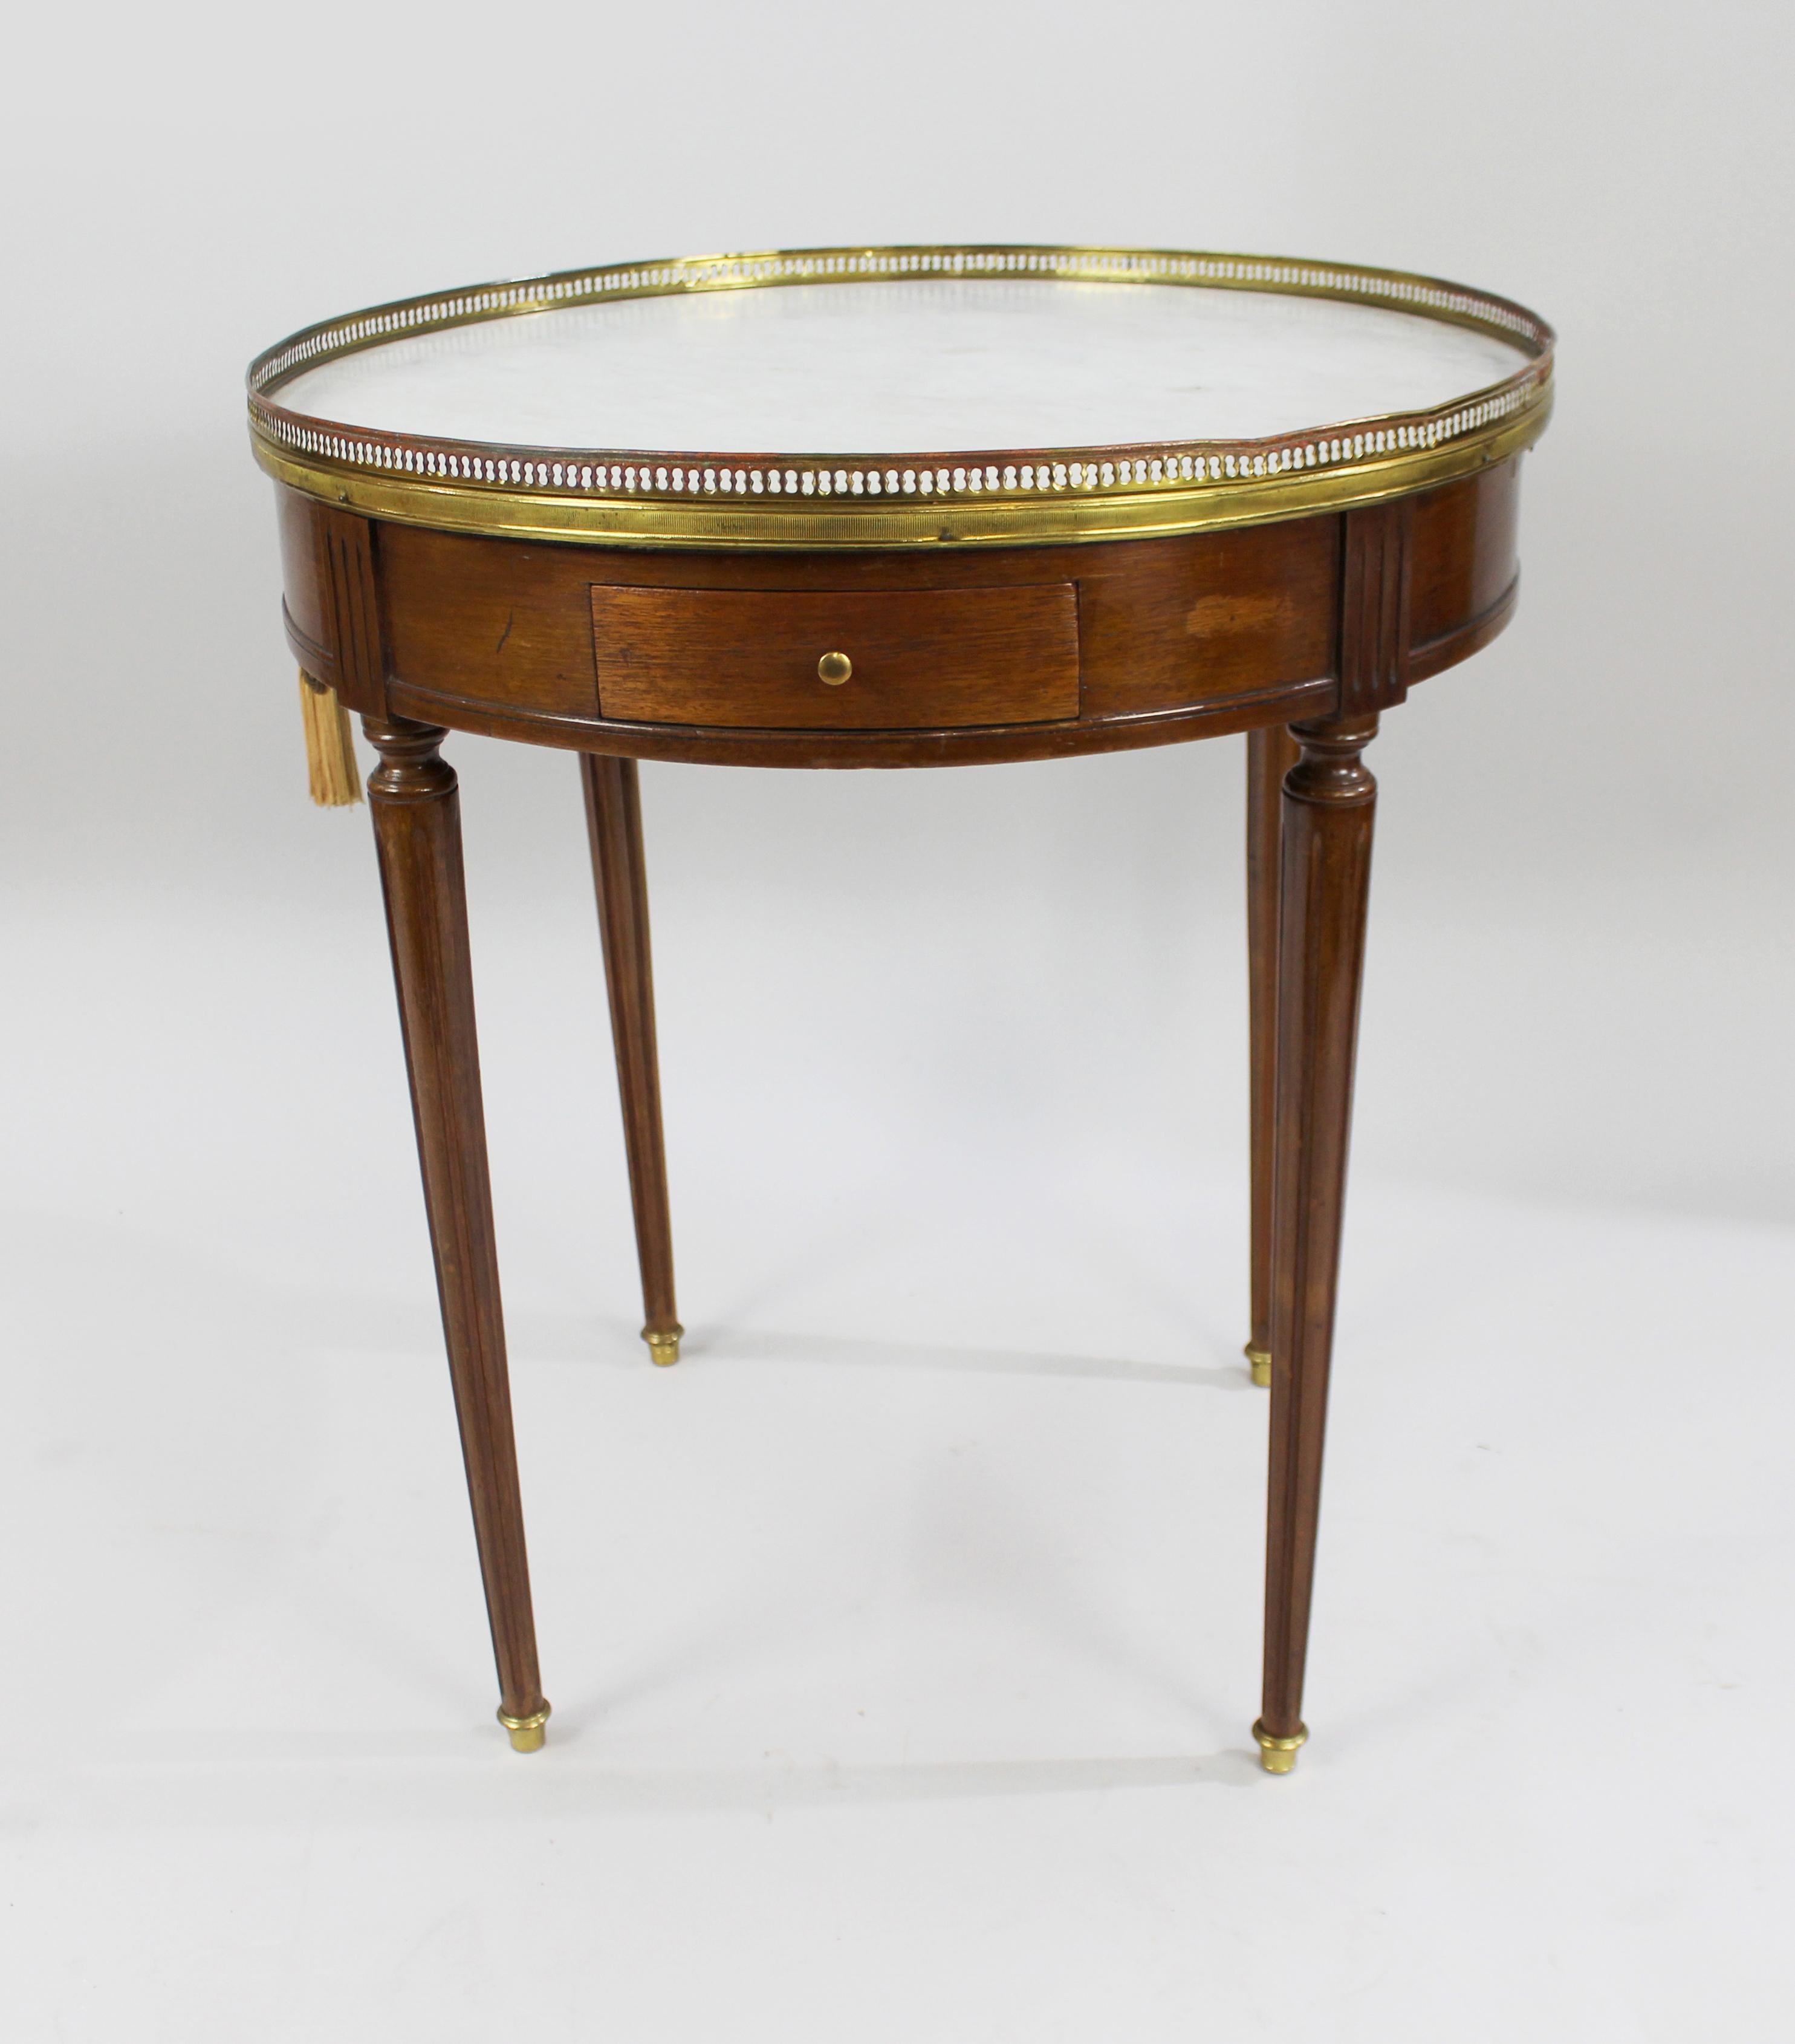 Period 
Vintage, early to mid-20th century, French

Wood 
Mahogany

Marble 
Circular Carrara marble top

Condition 
Sound structure. A few marks to marble top. Some little distortion to brass gallery top and wear to gilding. A few marks to